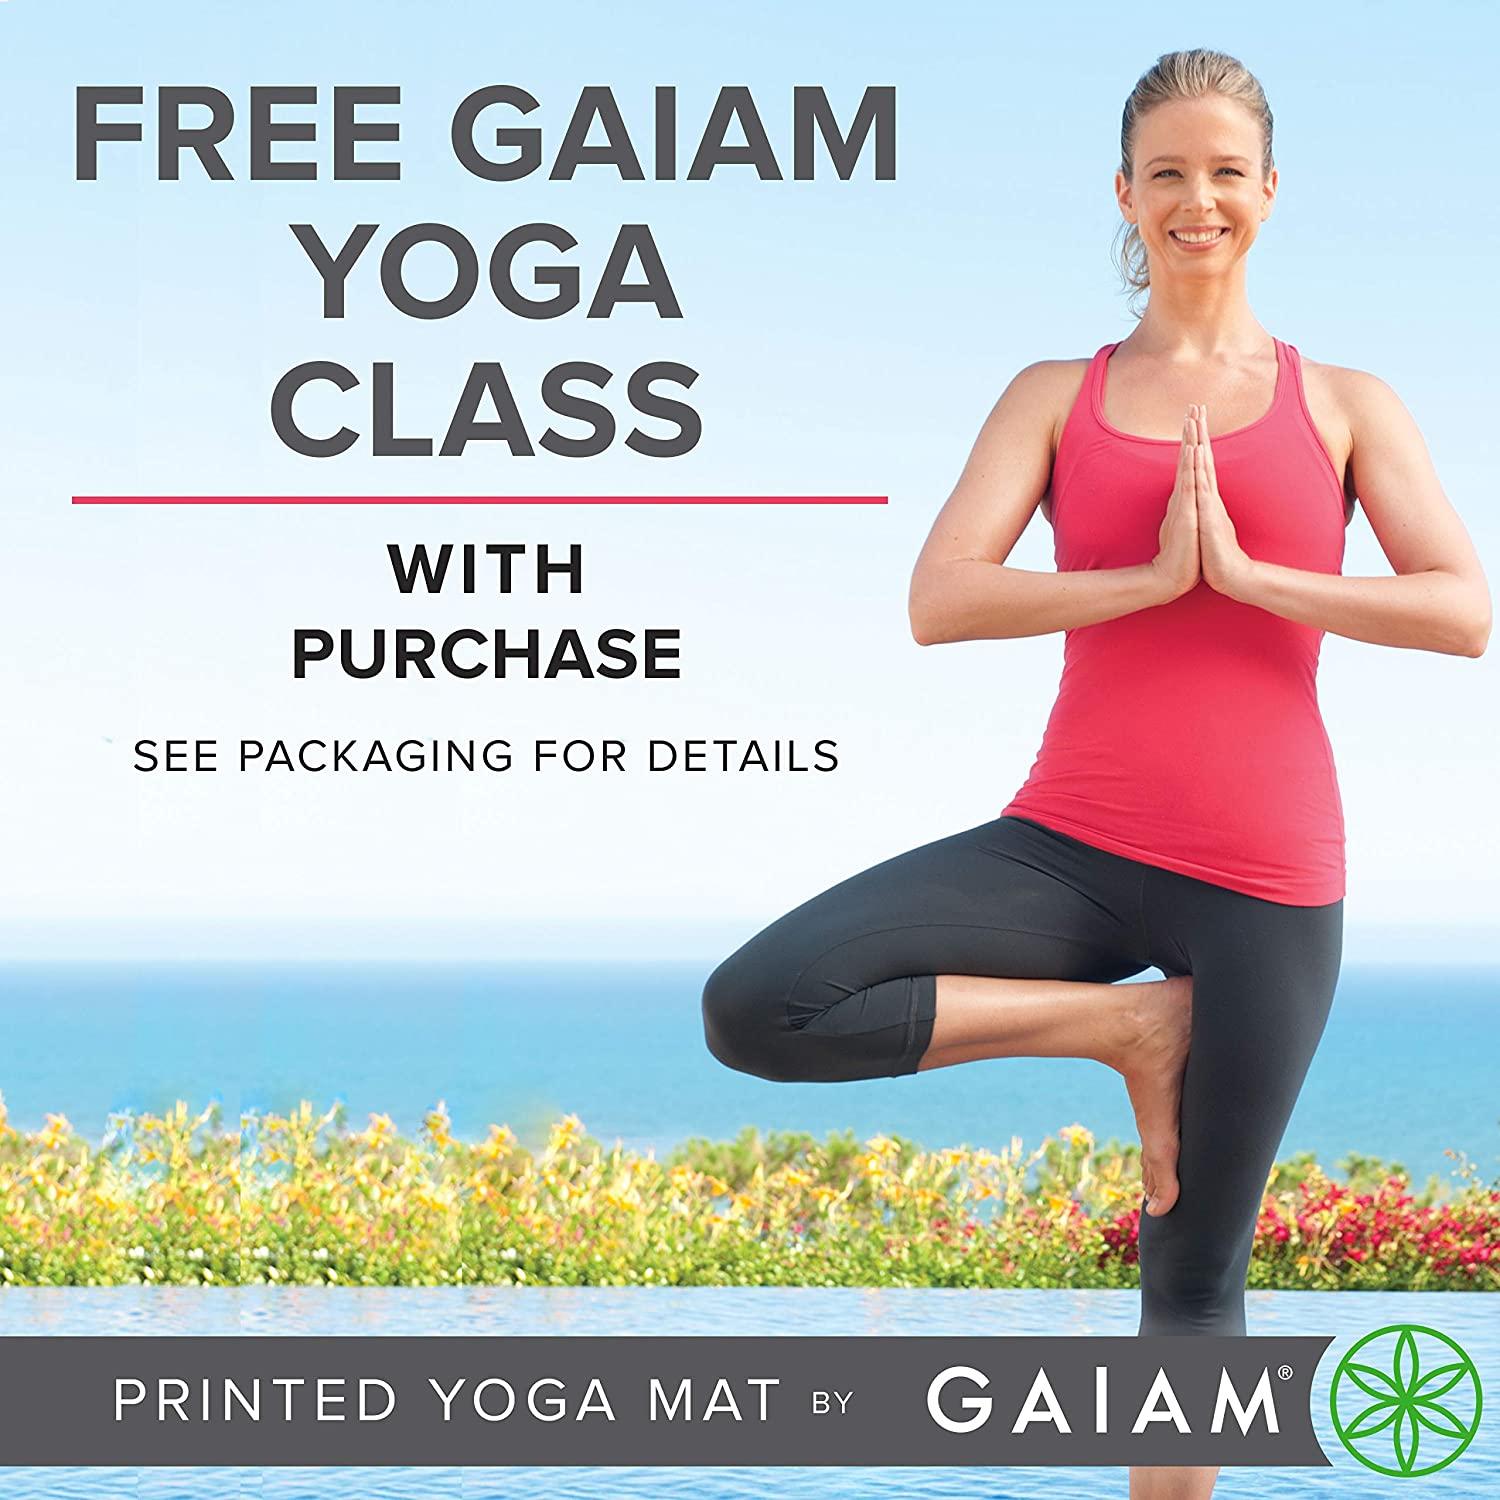 Gaiam Yoga Mat - Premium 5mm Print Thick Non Slip Exercise & Fitness Mat  for All Types of Yoga, Pilates & Floor Workouts (68 x 24 x 5mm) Altitude  Point